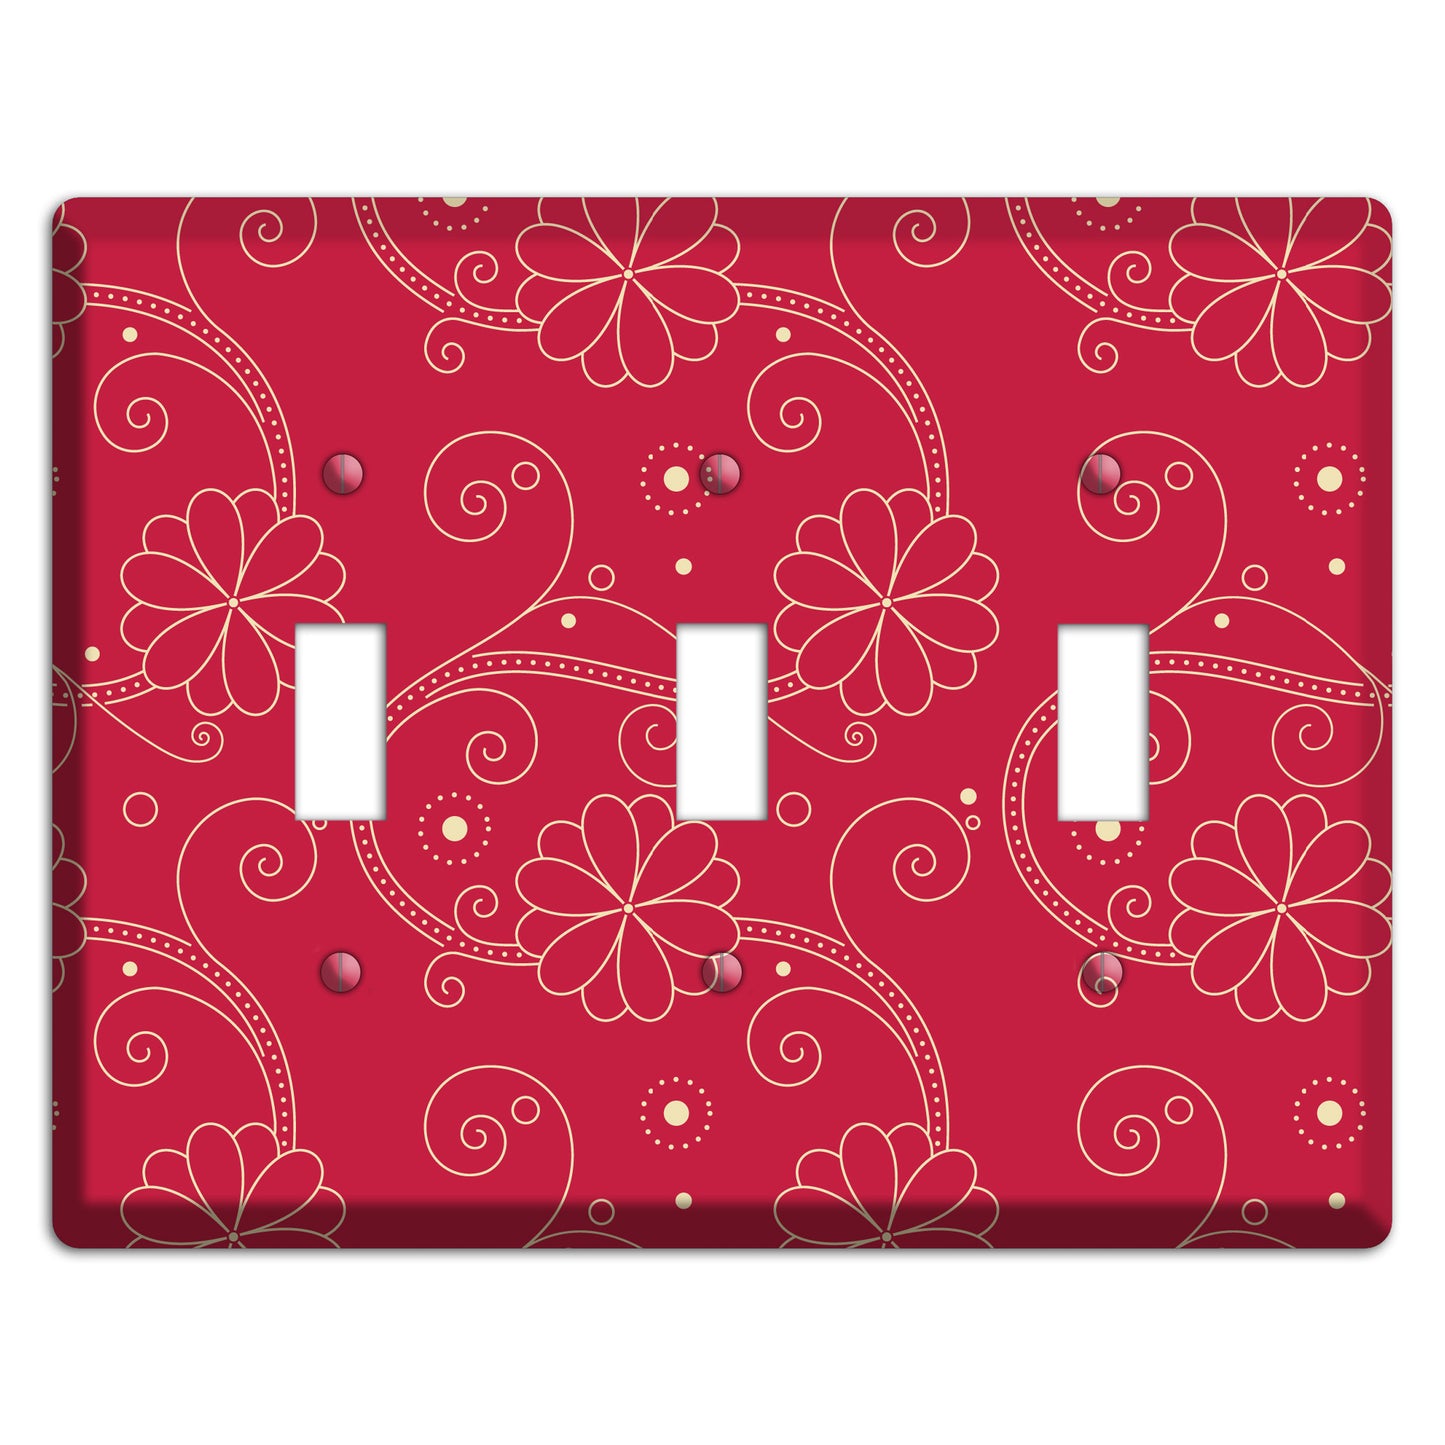 Red Floral Swirl 3 Toggle Wallplate